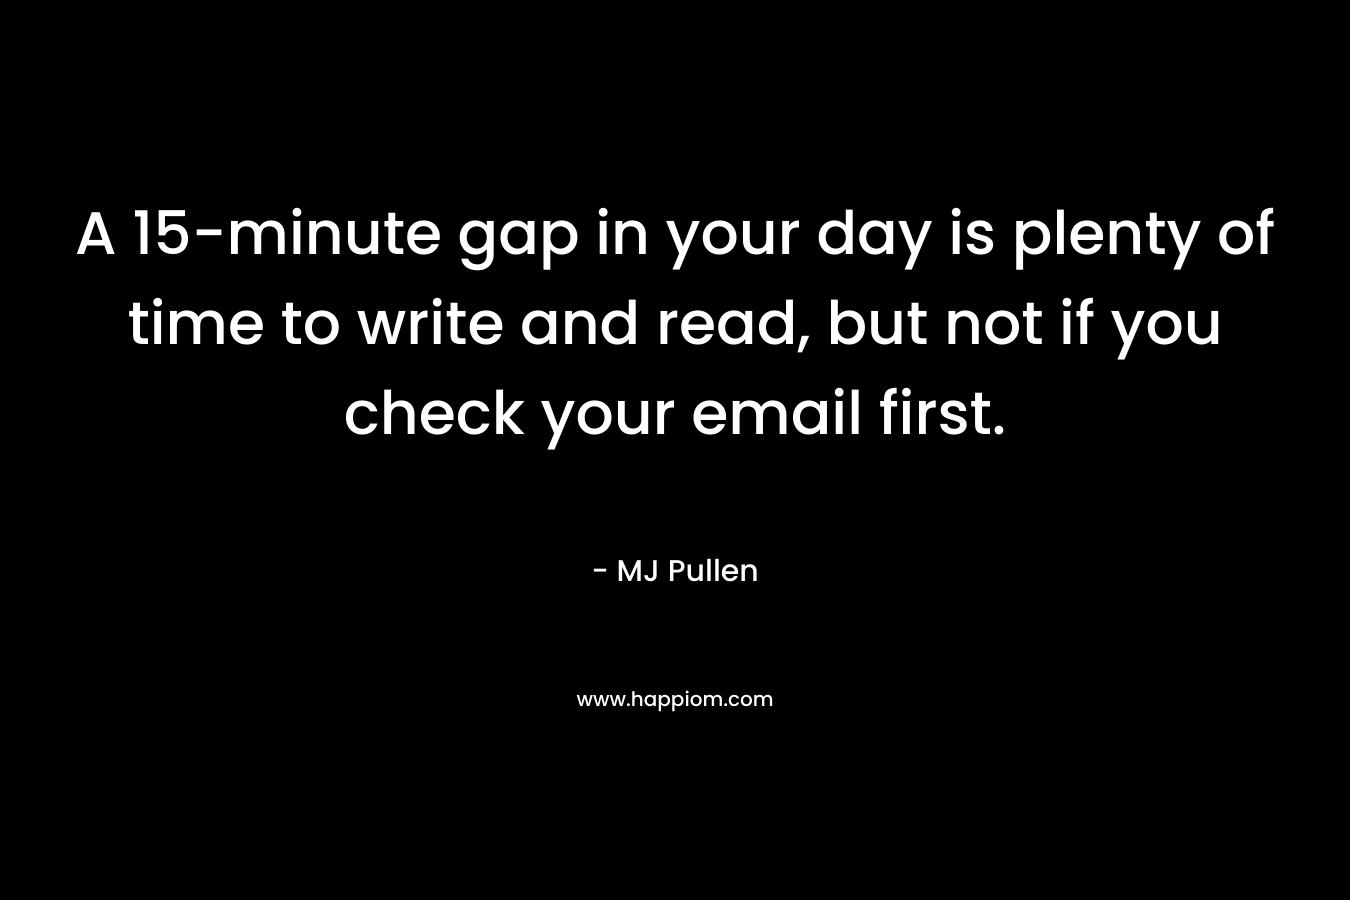 A 15-minute gap in your day is plenty of time to write and read, but not if you check your email first. – MJ Pullen